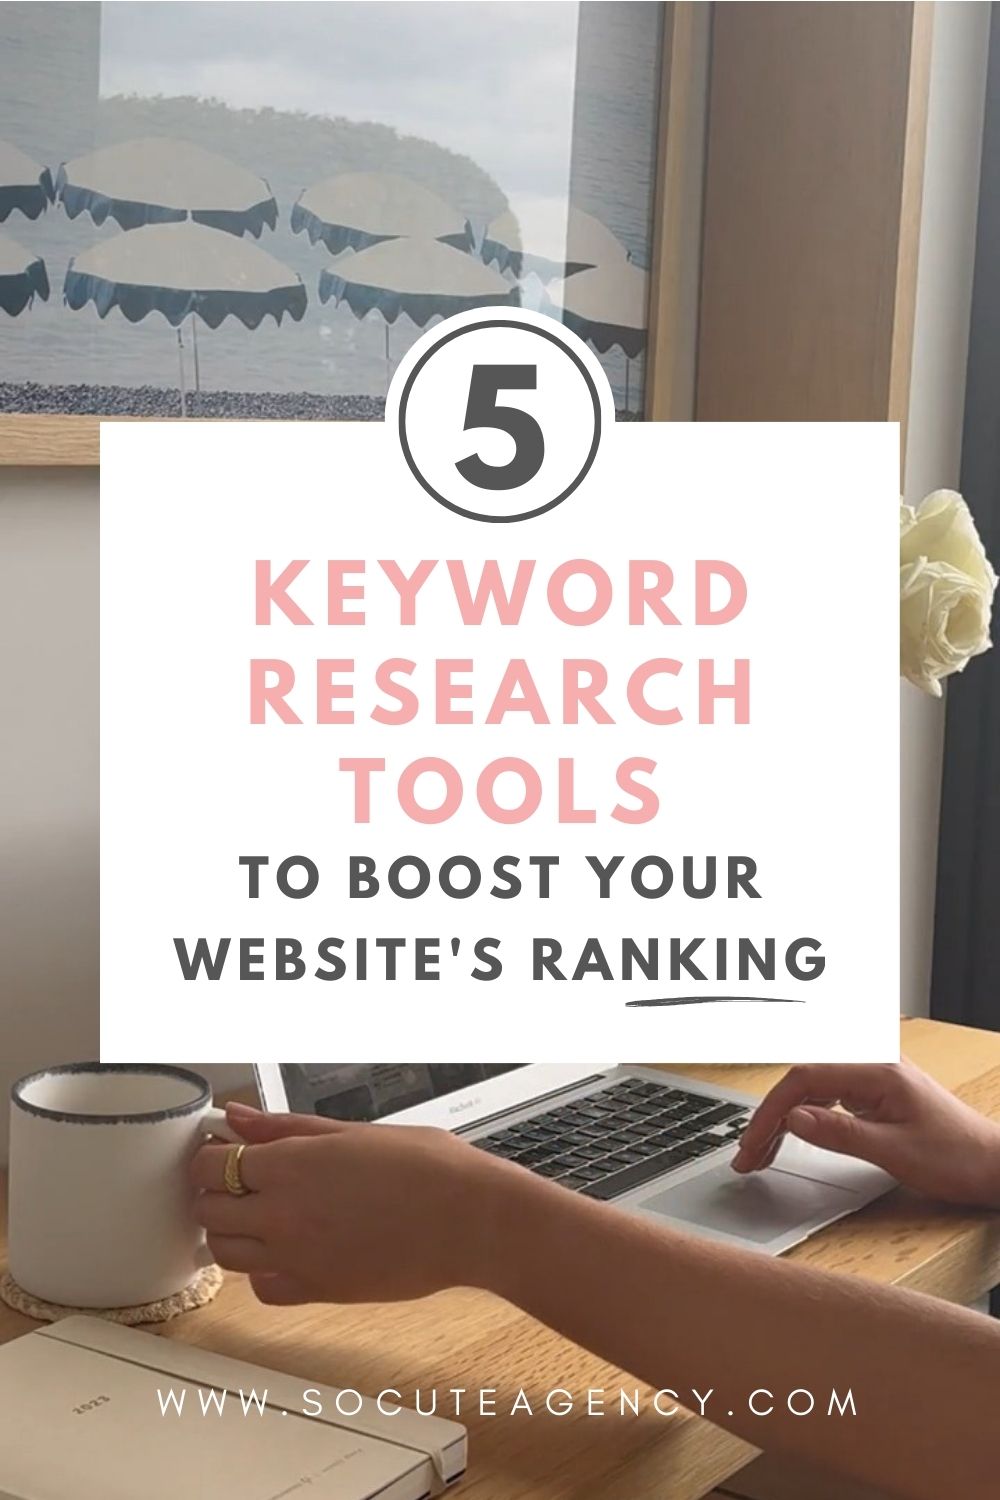 Top Keyword Research Tools to Boost Your Website's Ranking